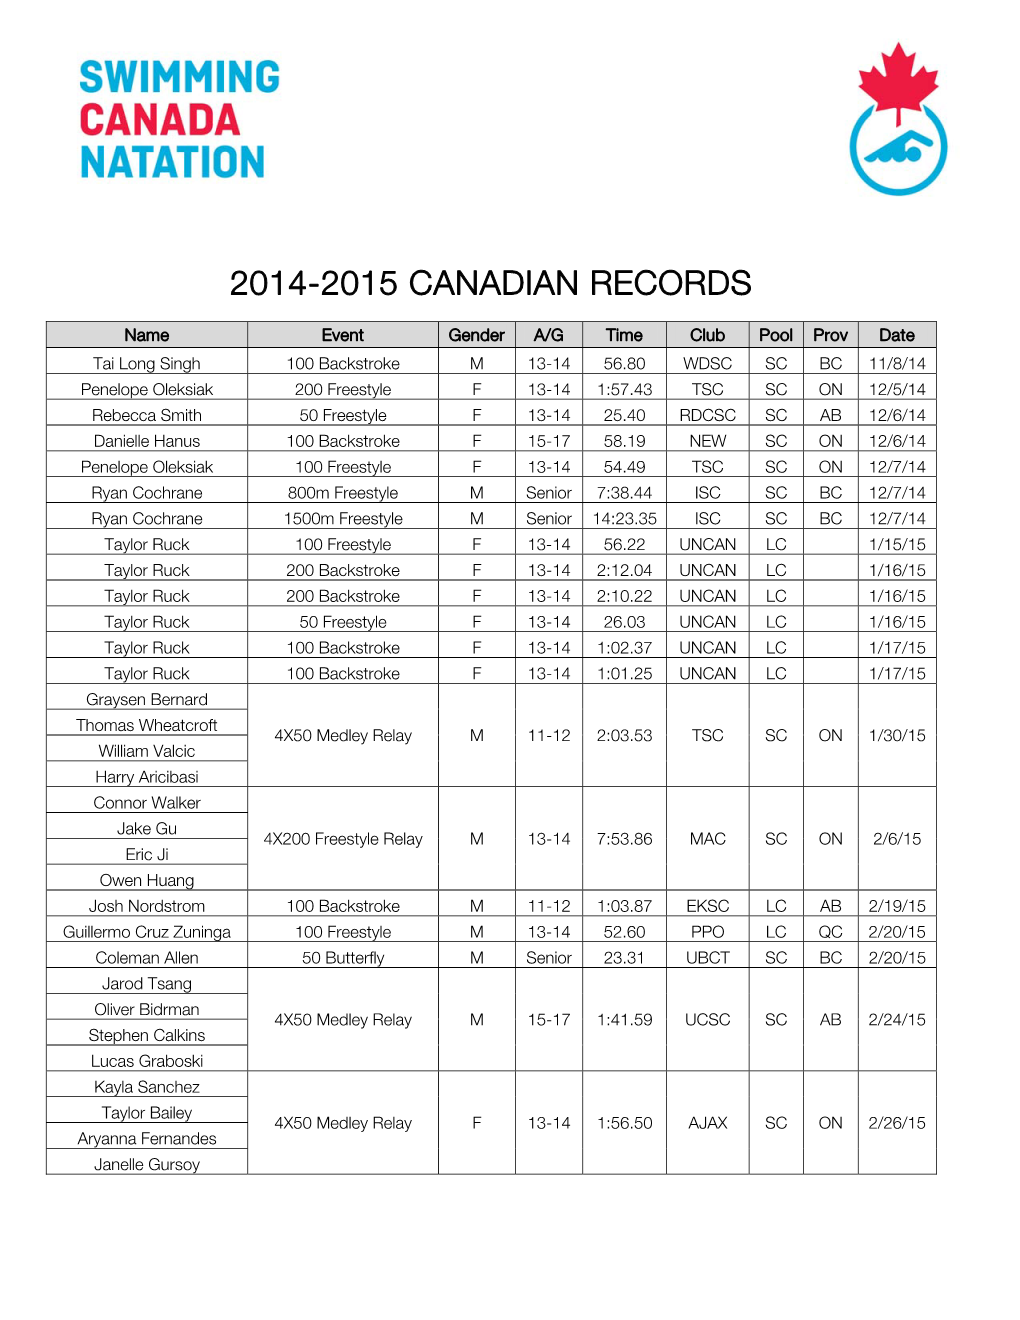 2014-2015 Canadian Records